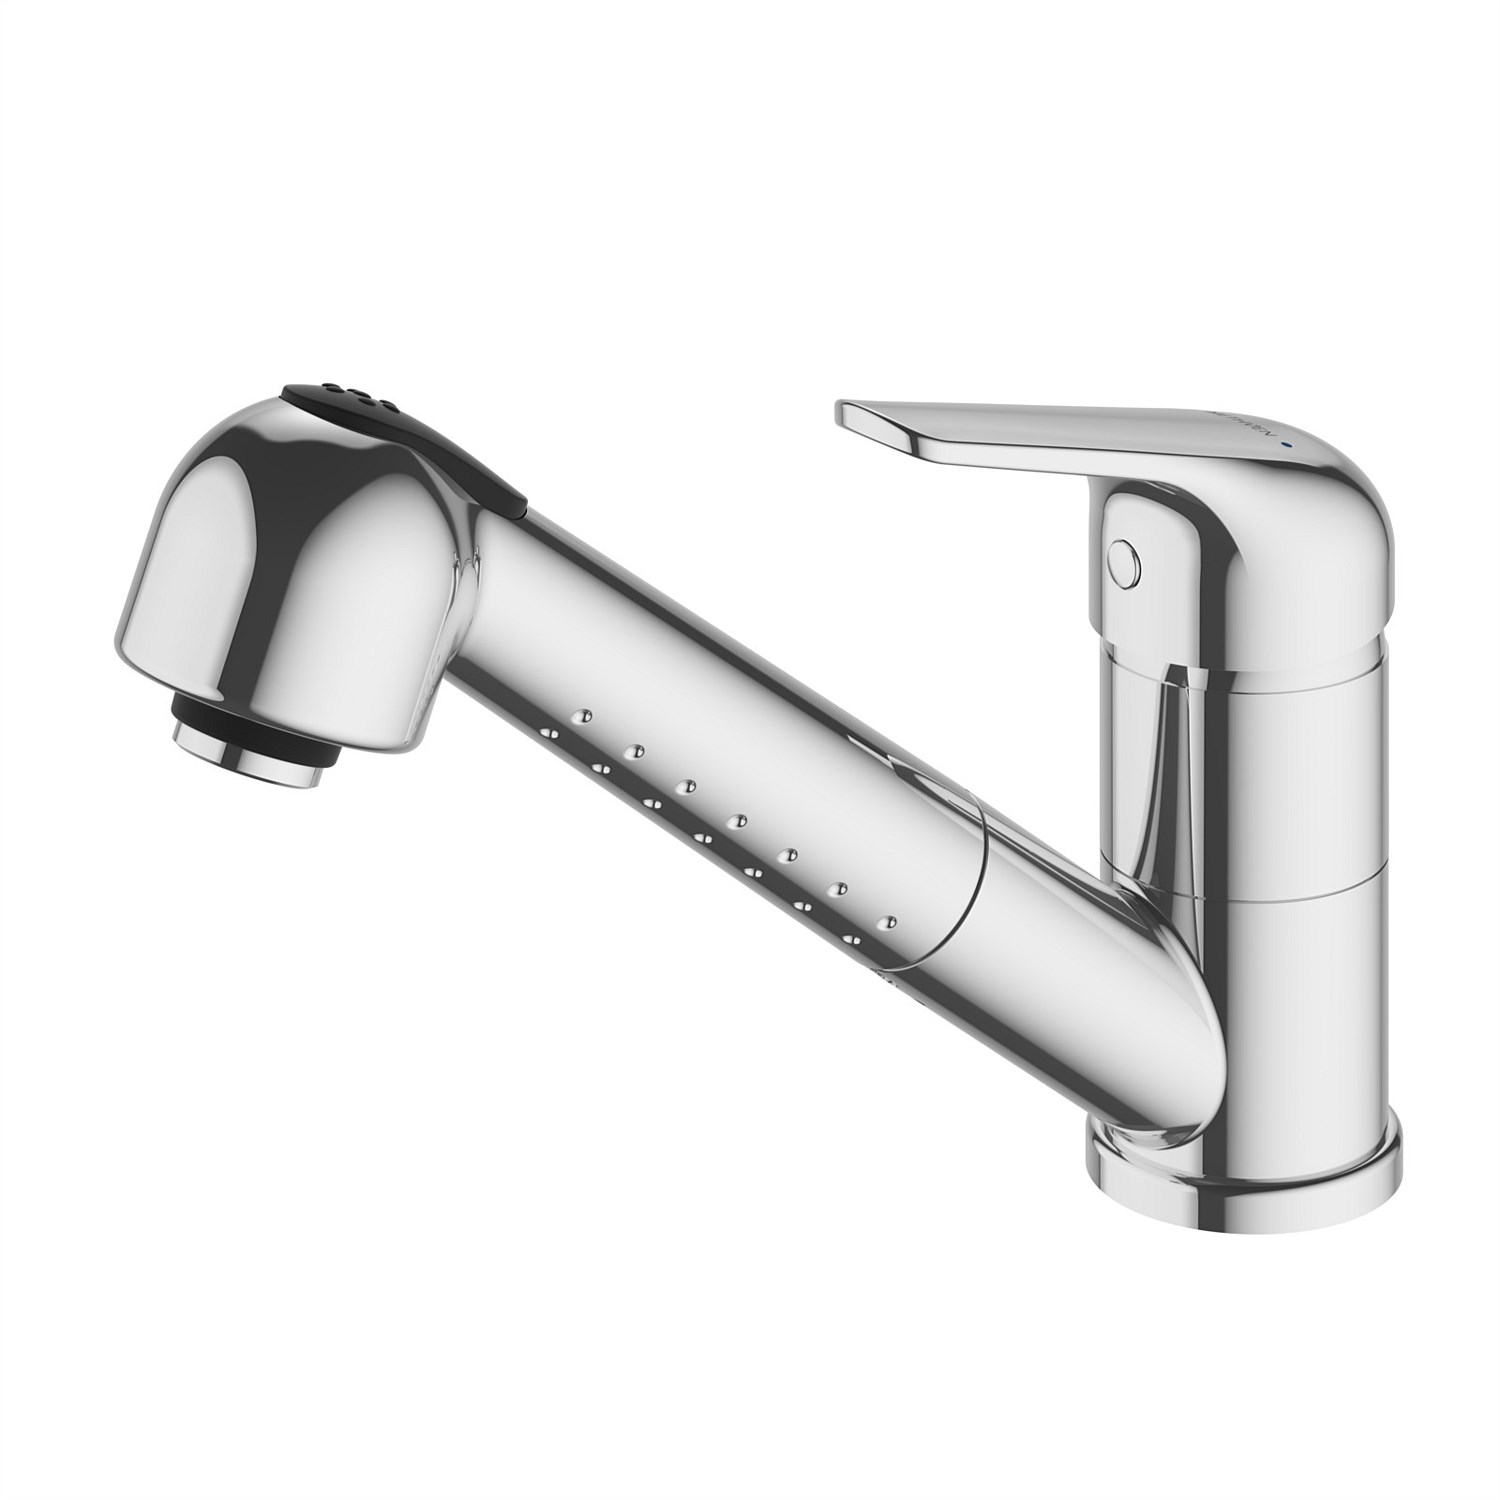 Kitchen Taps & Sink Mixers | Plumbing World - Methven Centique Single Lever  Sink Mixer With Pull-Out Spray Head